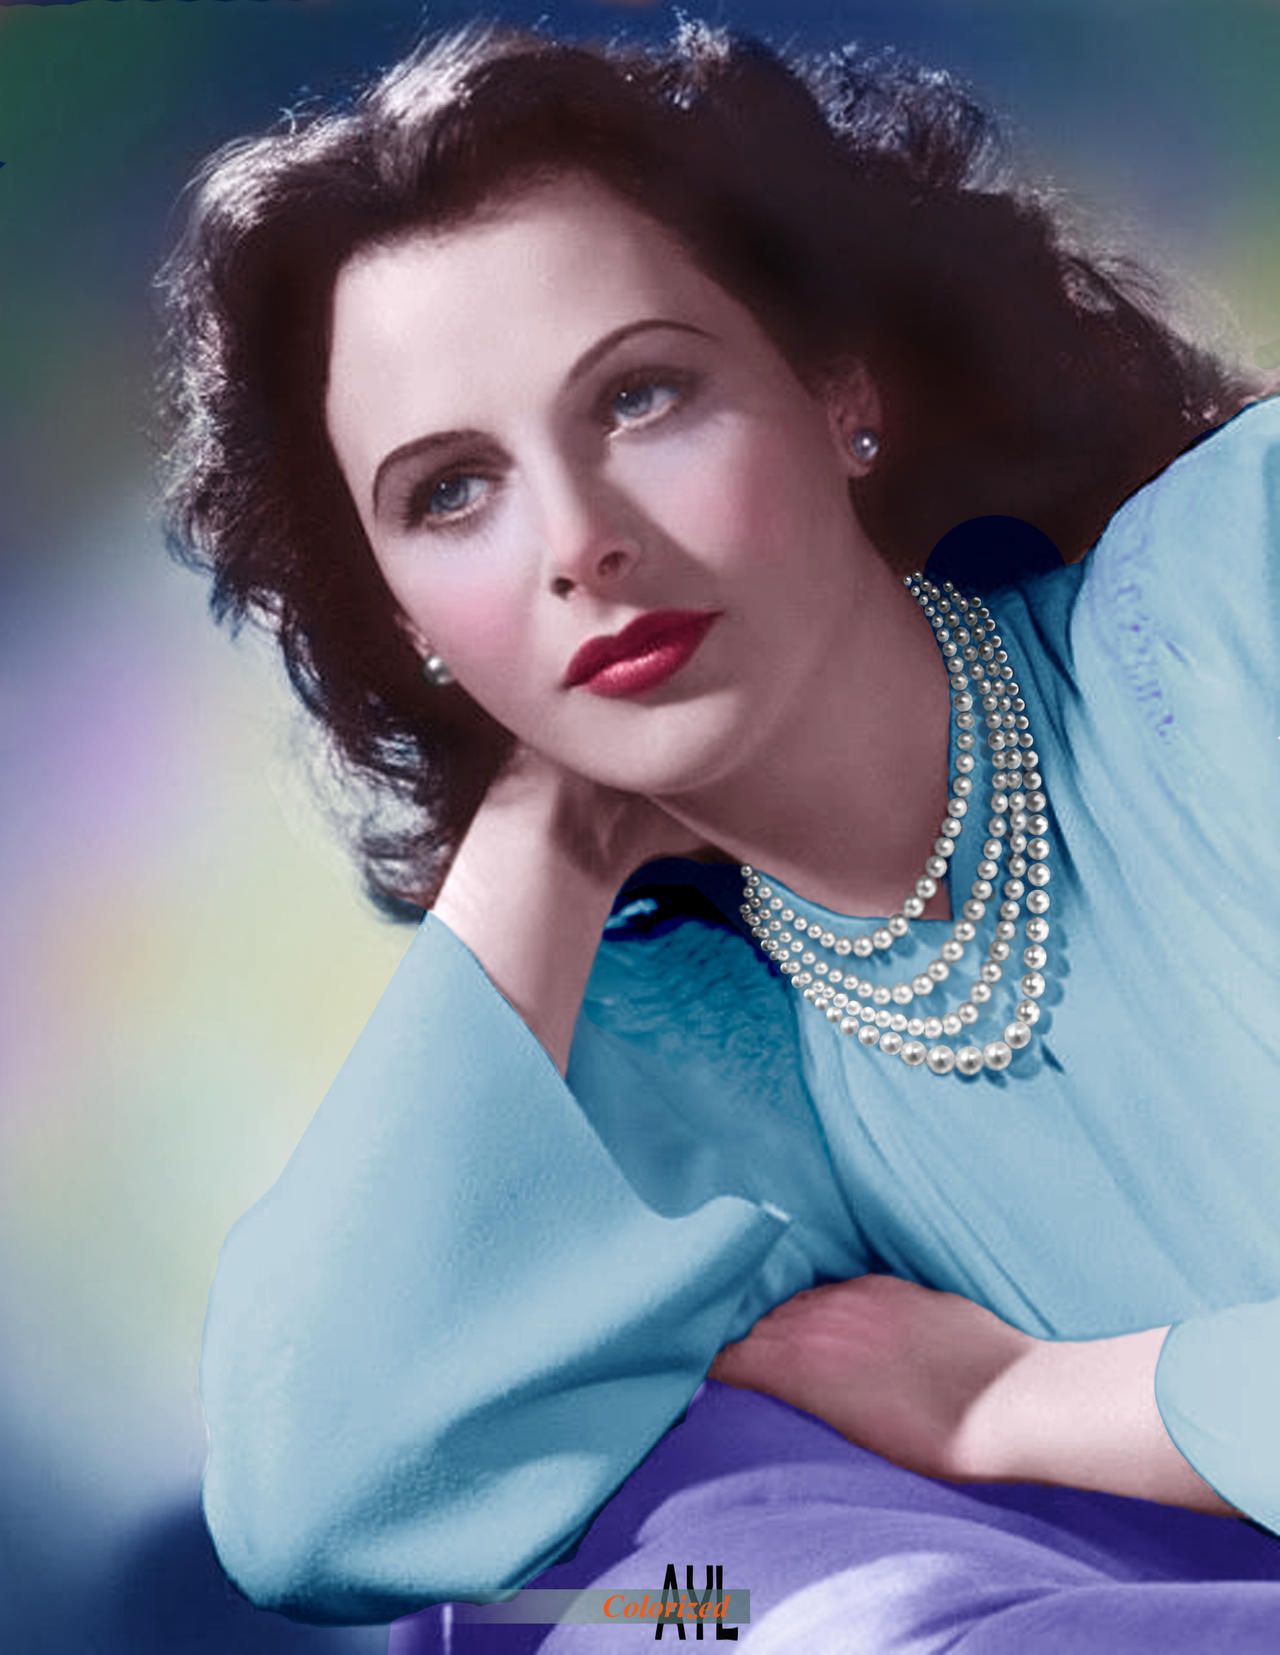 Hedy Lamarr —  also known as the ‘𝐌𝐨𝐭𝐡𝐞𝐫 𝐨𝐟 𝐖-𝐅𝐢’ and considered as one of the ‘𝐦𝐨𝐬𝐭 𝐛𝐞𝐚𝐮𝐭𝐢𝐟𝐮𝐥 𝐰𝐨𝐦𝐚𝐧 𝐢𝐧 𝐭𝐡𝐞 𝐰𝐨𝐫𝐥𝐝